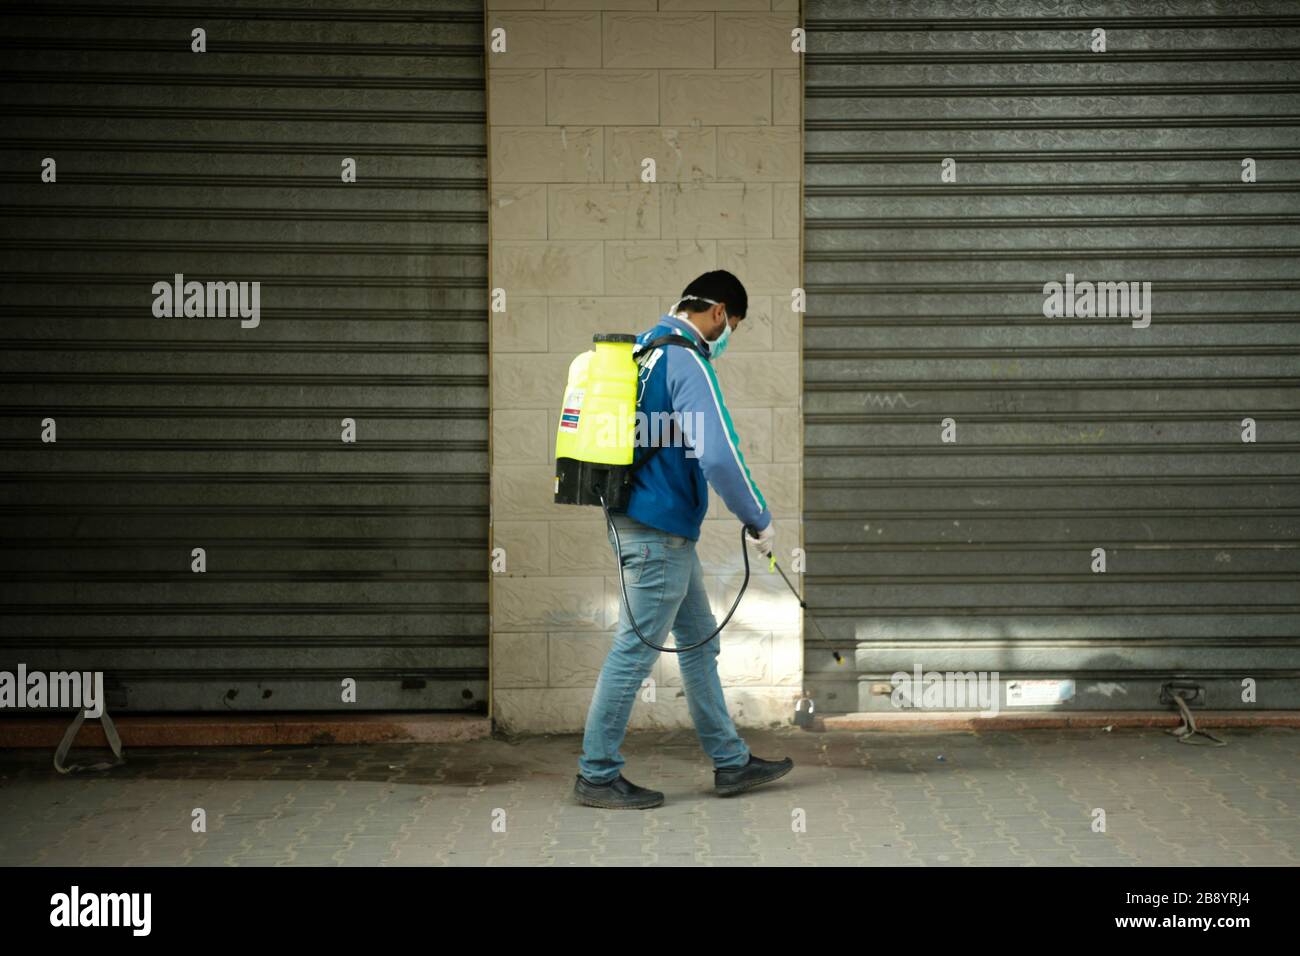 Gaza, Palestine. 23rd Mar, 2020. A member of a volunteer group carries out disinfection works as a precaution against the coronavirus (COVID-19) pandemic at a shopping area in Beit Lahia, north of Gaza, Gaza. (Photo by Ramez Habboub/Pacific Press) Credit: Pacific Press Agency/Alamy Live News Stock Photo